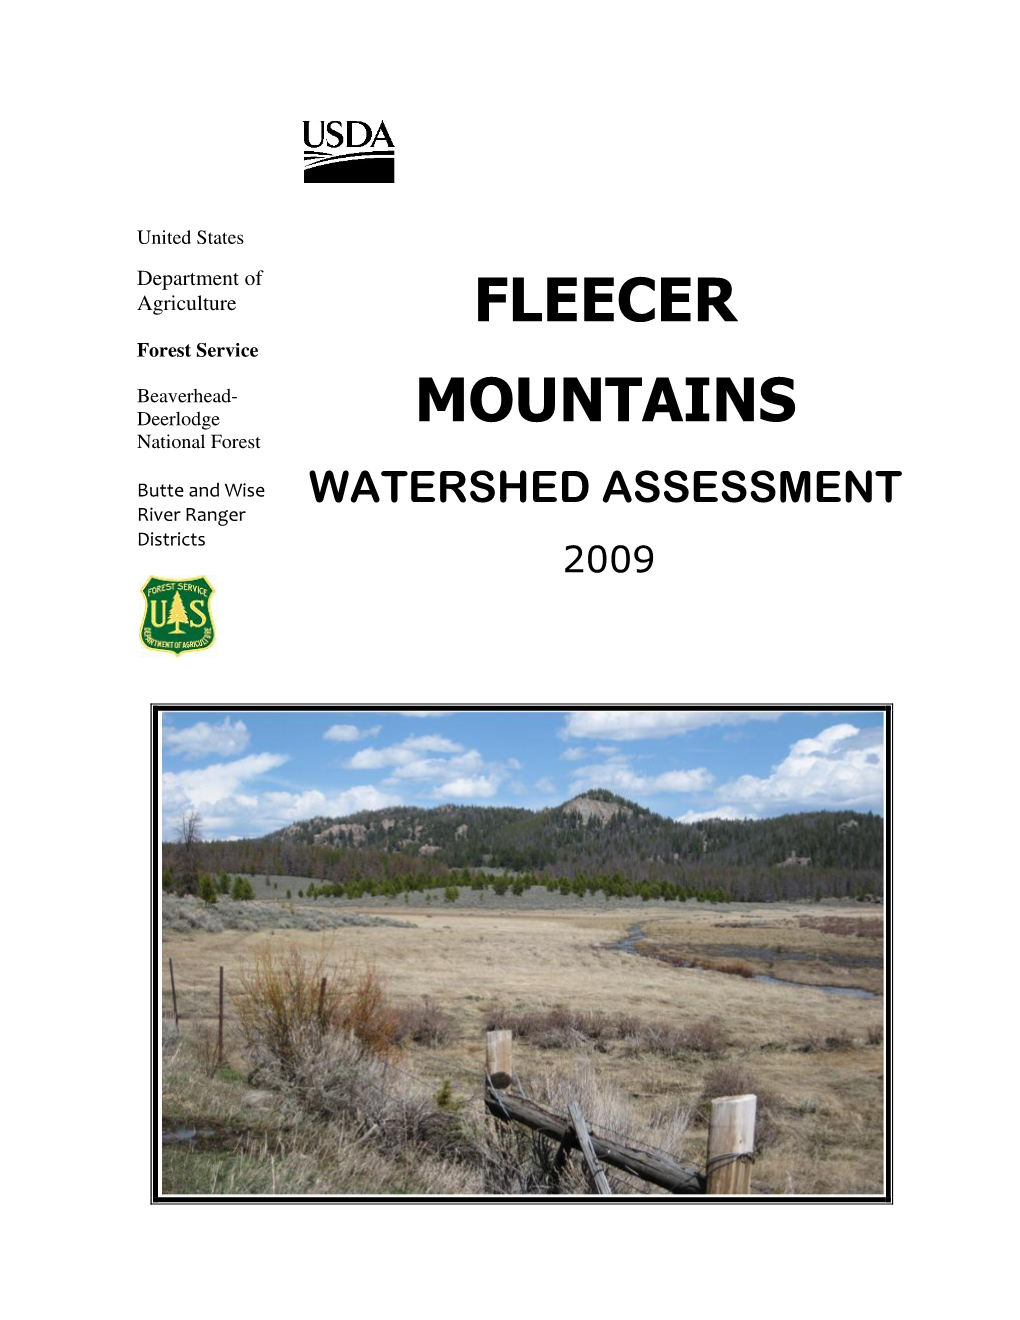 Fleecer Mountains Watersheds Based on Information Developed by a 10 Person Interdisciplinary Team